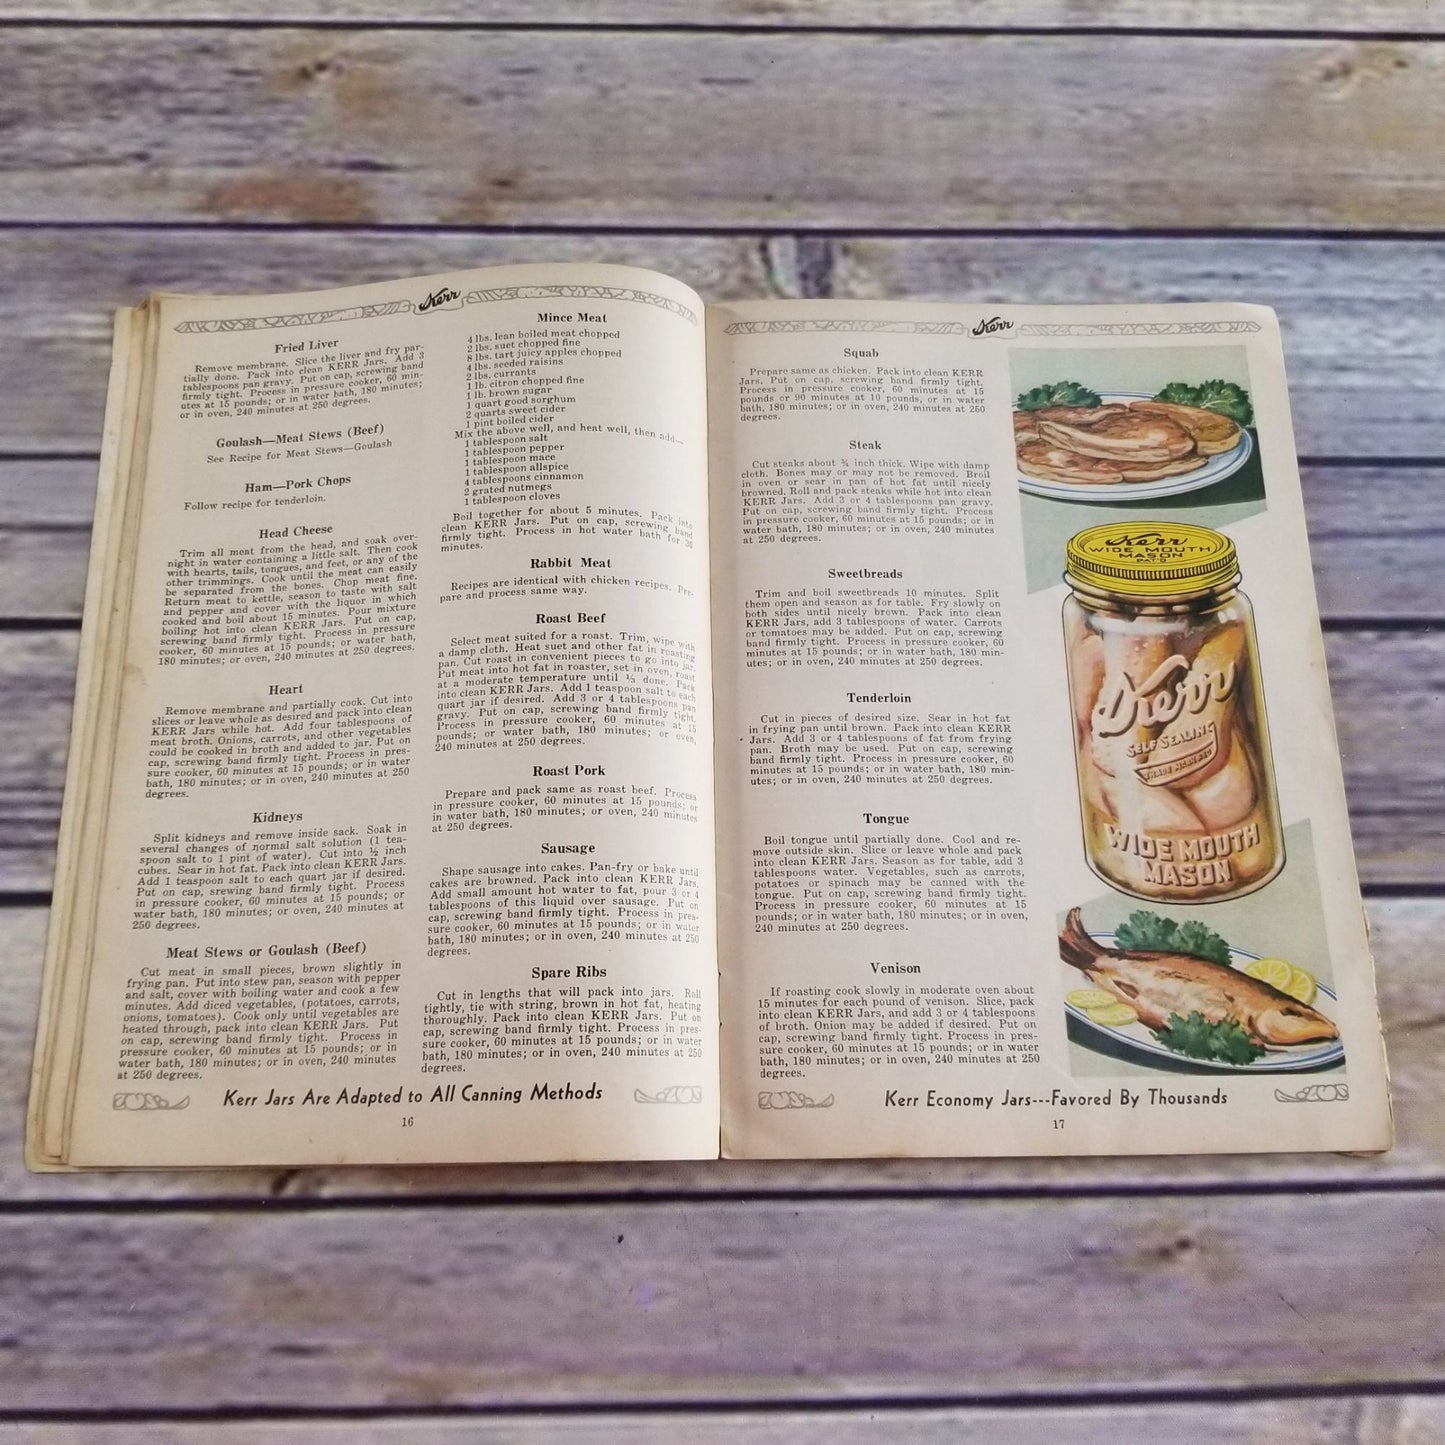 Vintage Kerr Home Canning Book Cookbook Recipes 1938 Booklet Yellow Blue Cover Canning Tips Food Preservation